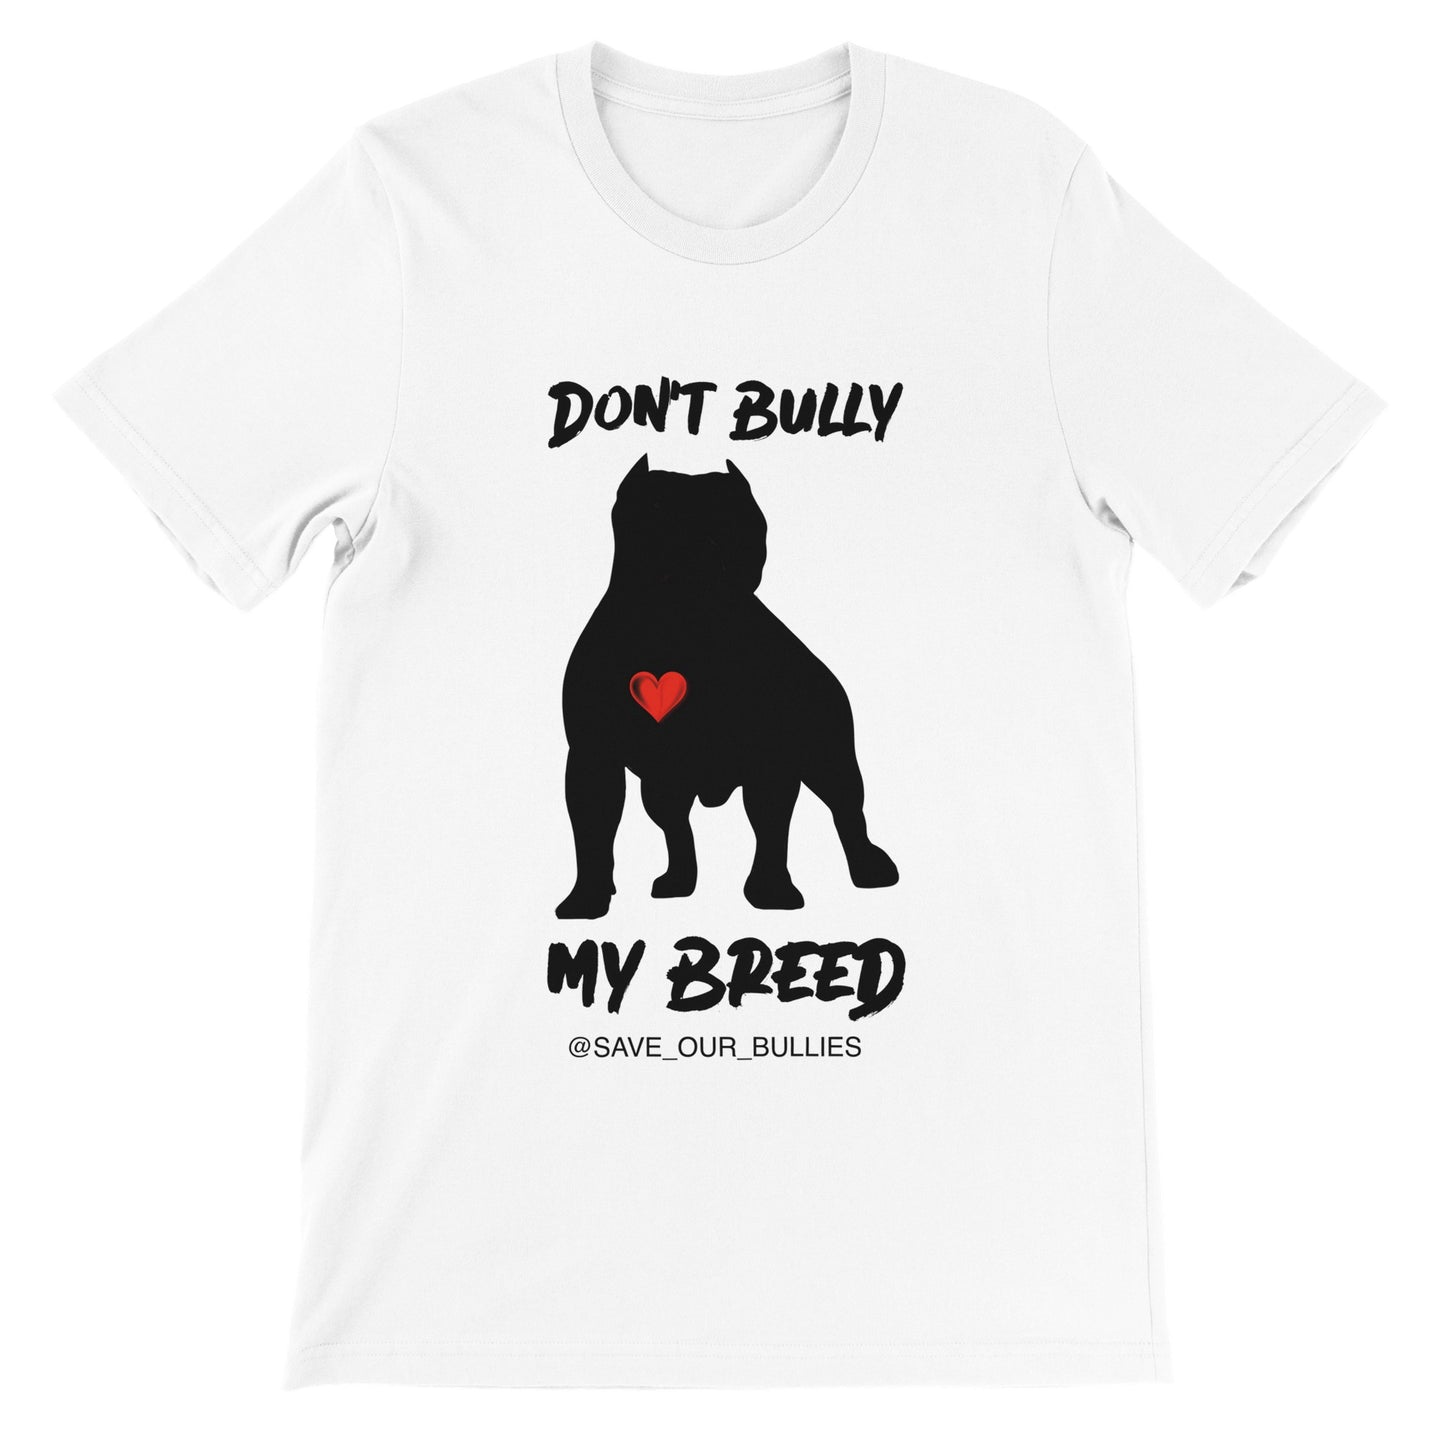 My Breed (red heart) Unisex Crewneck T-shirt